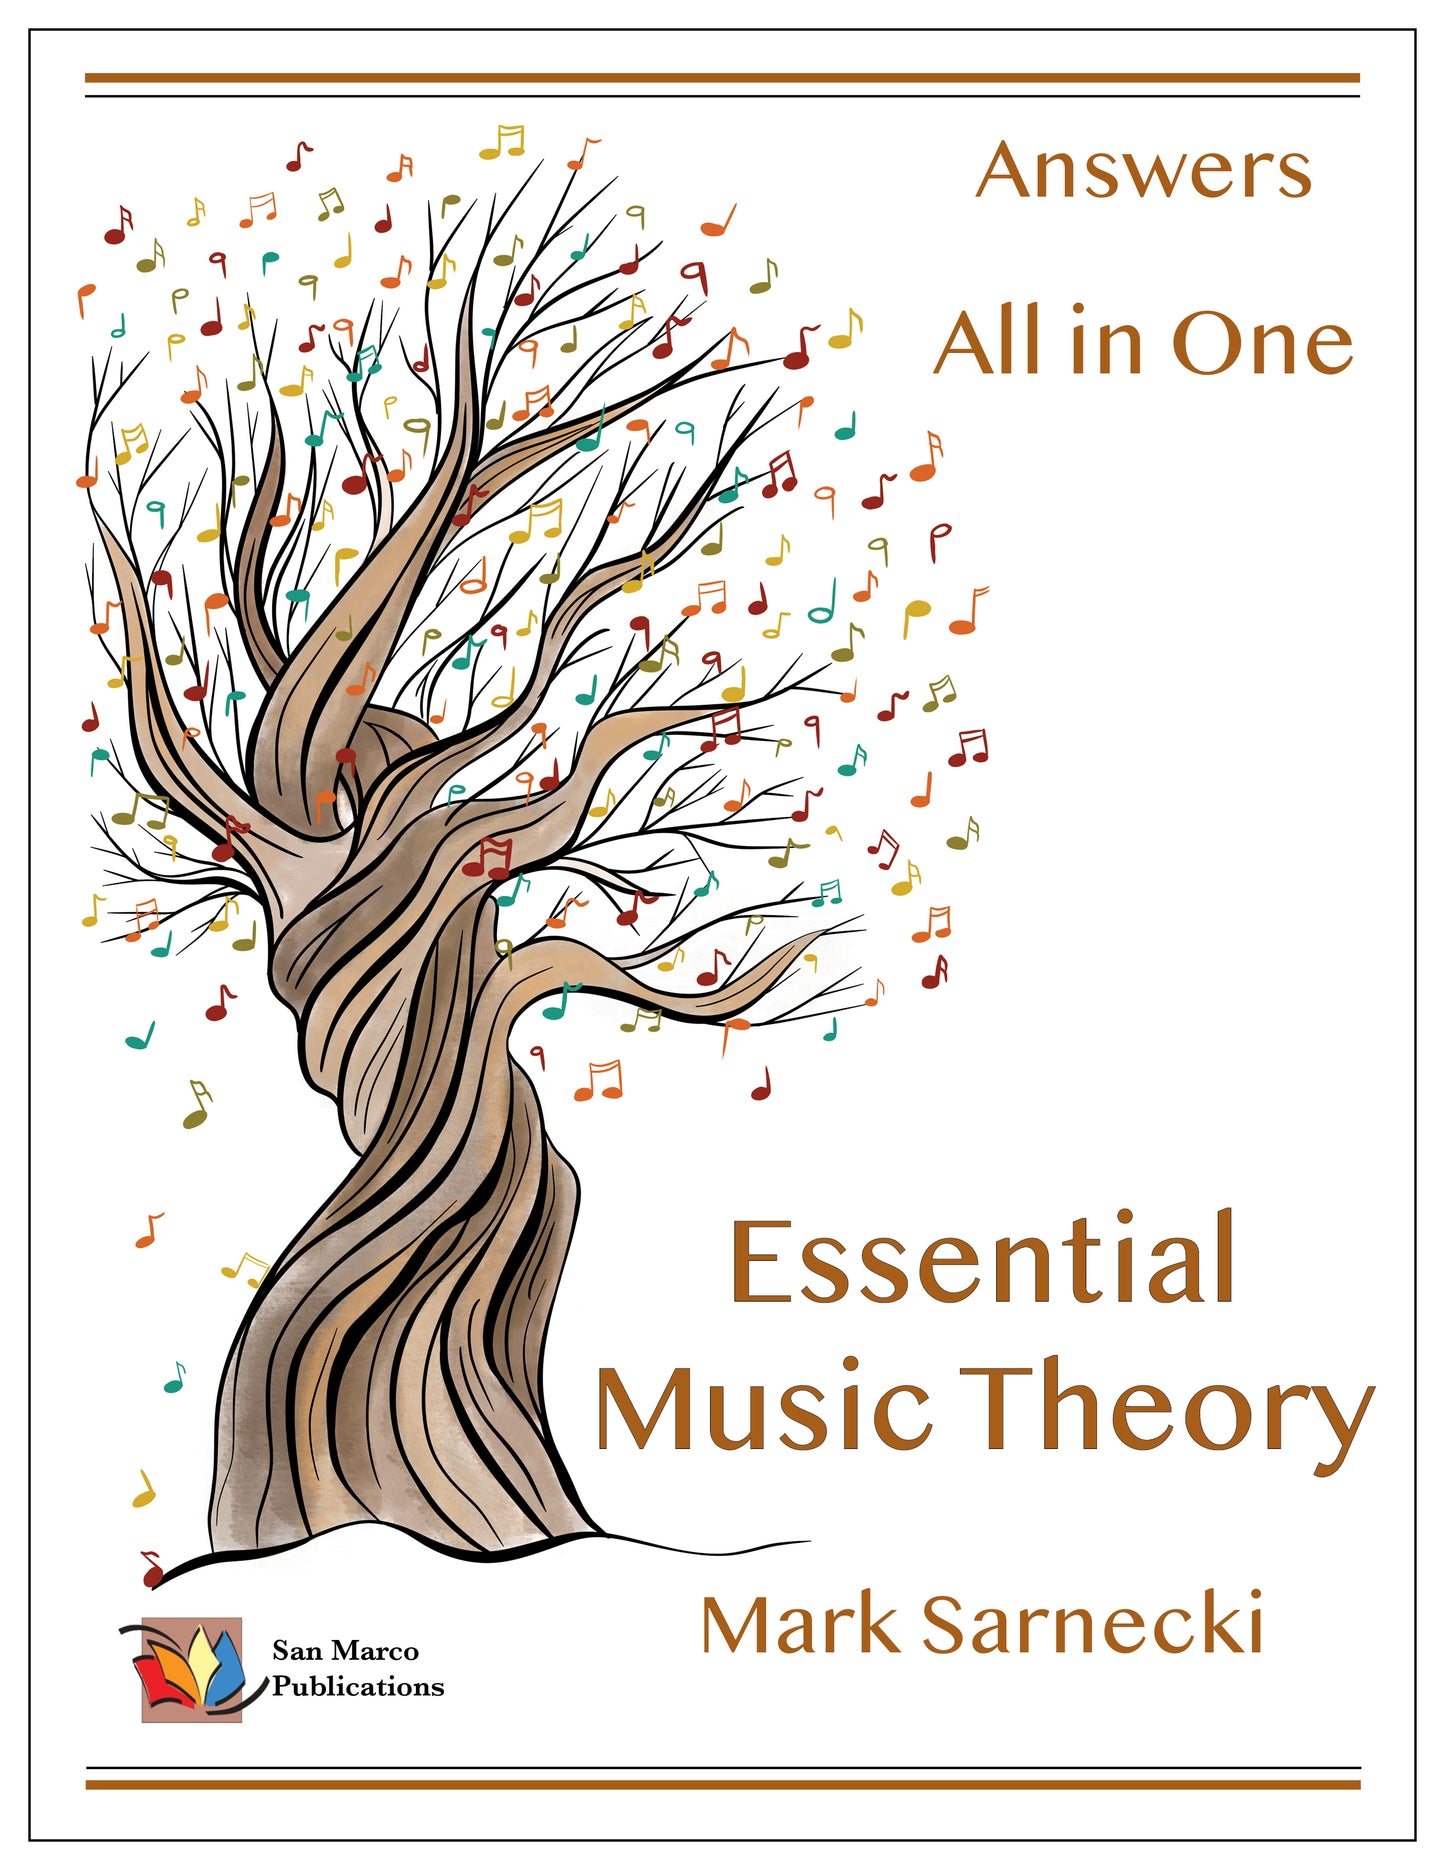 Essential Music Theory All in One Answers